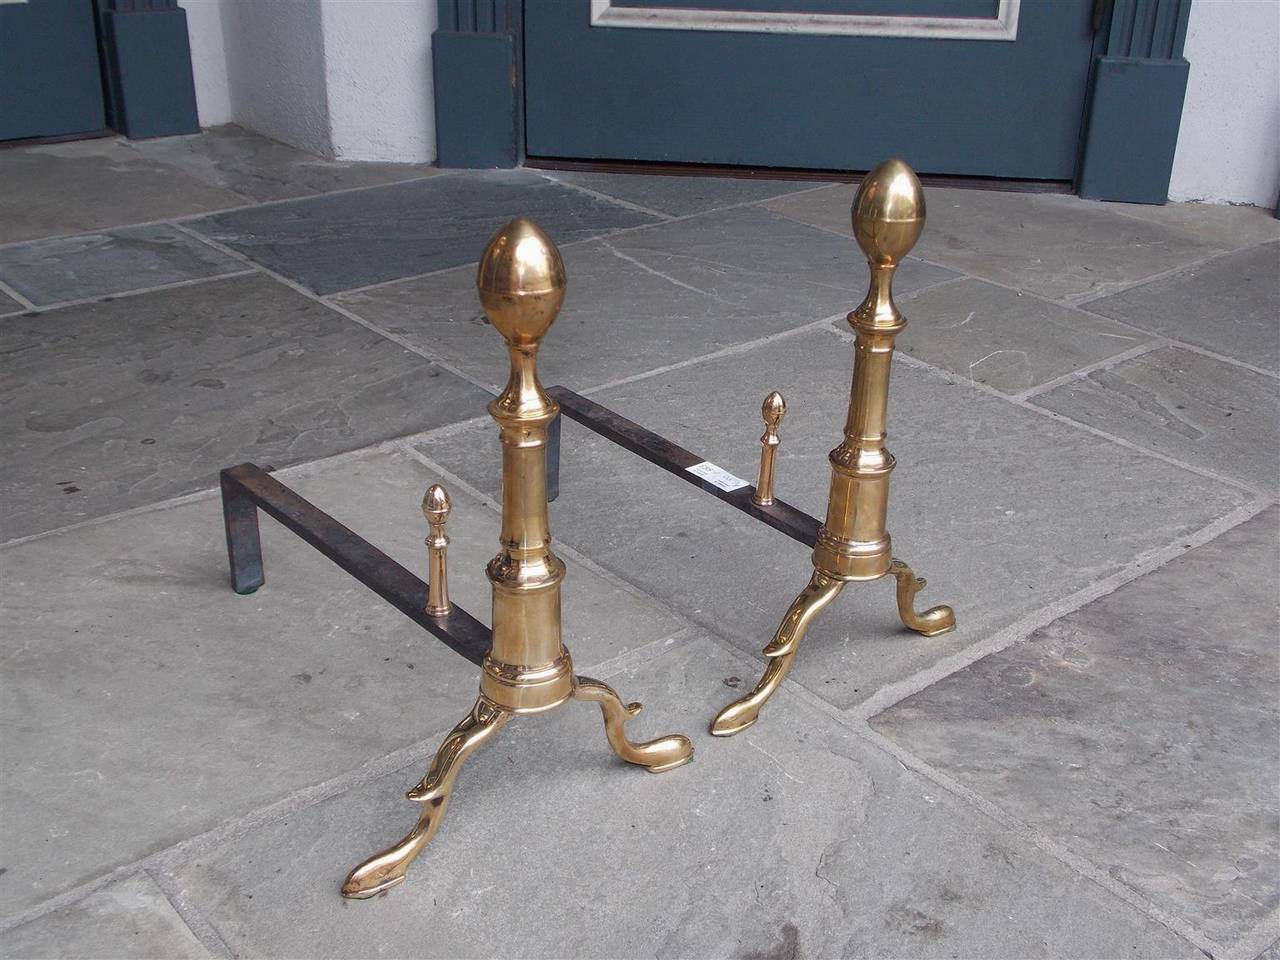 Pair of American brass lemon top andirons with turned bulbous plinths, matching log stops, and terminating on spurred legs with slipper feet. All original. Boston, Late 18th Century.